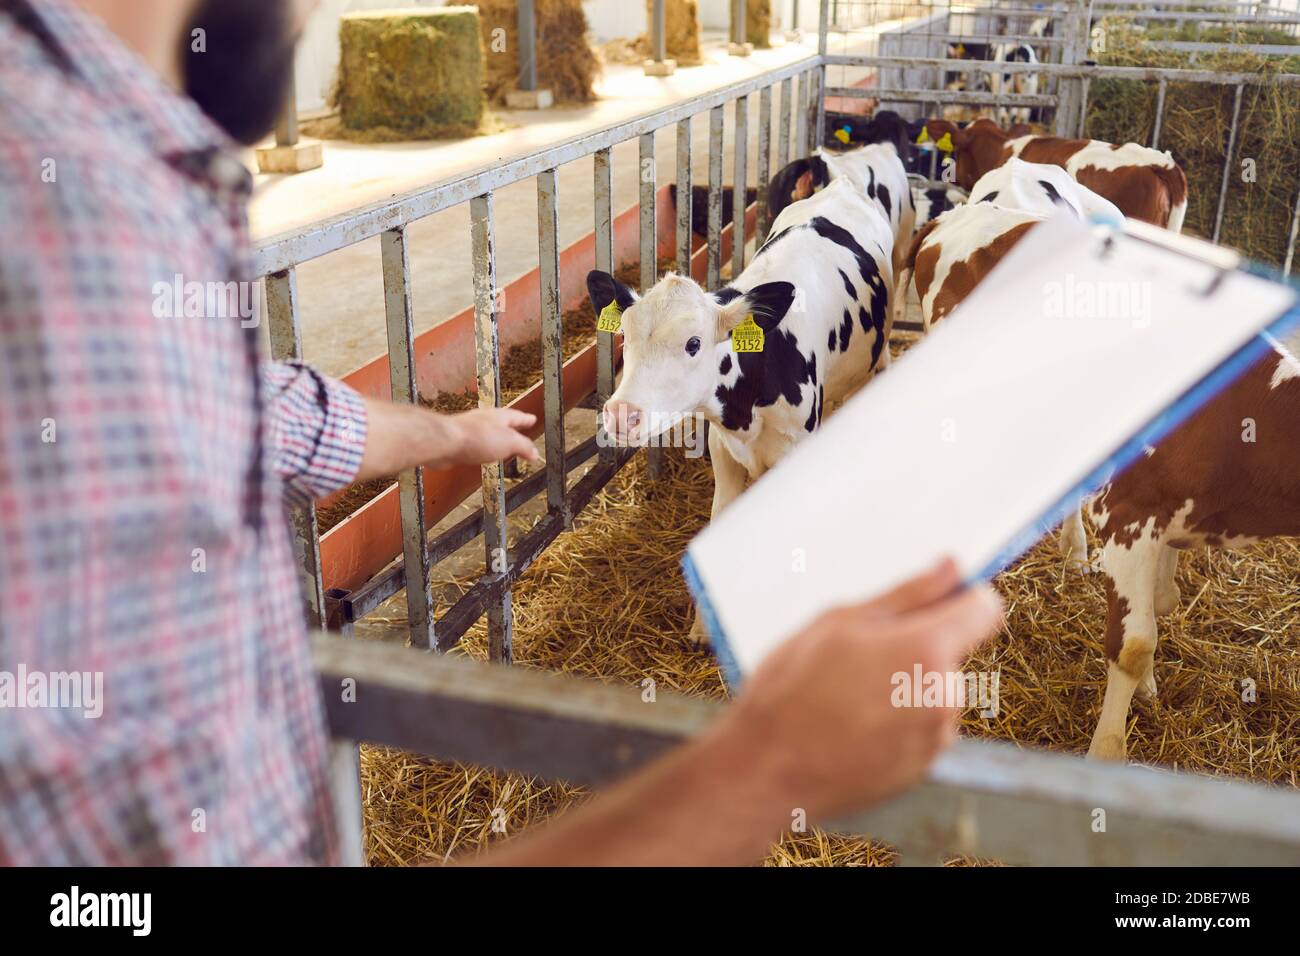 Male farmer monitors the breeding of calves on the farm and records the data about them. Stock Photo